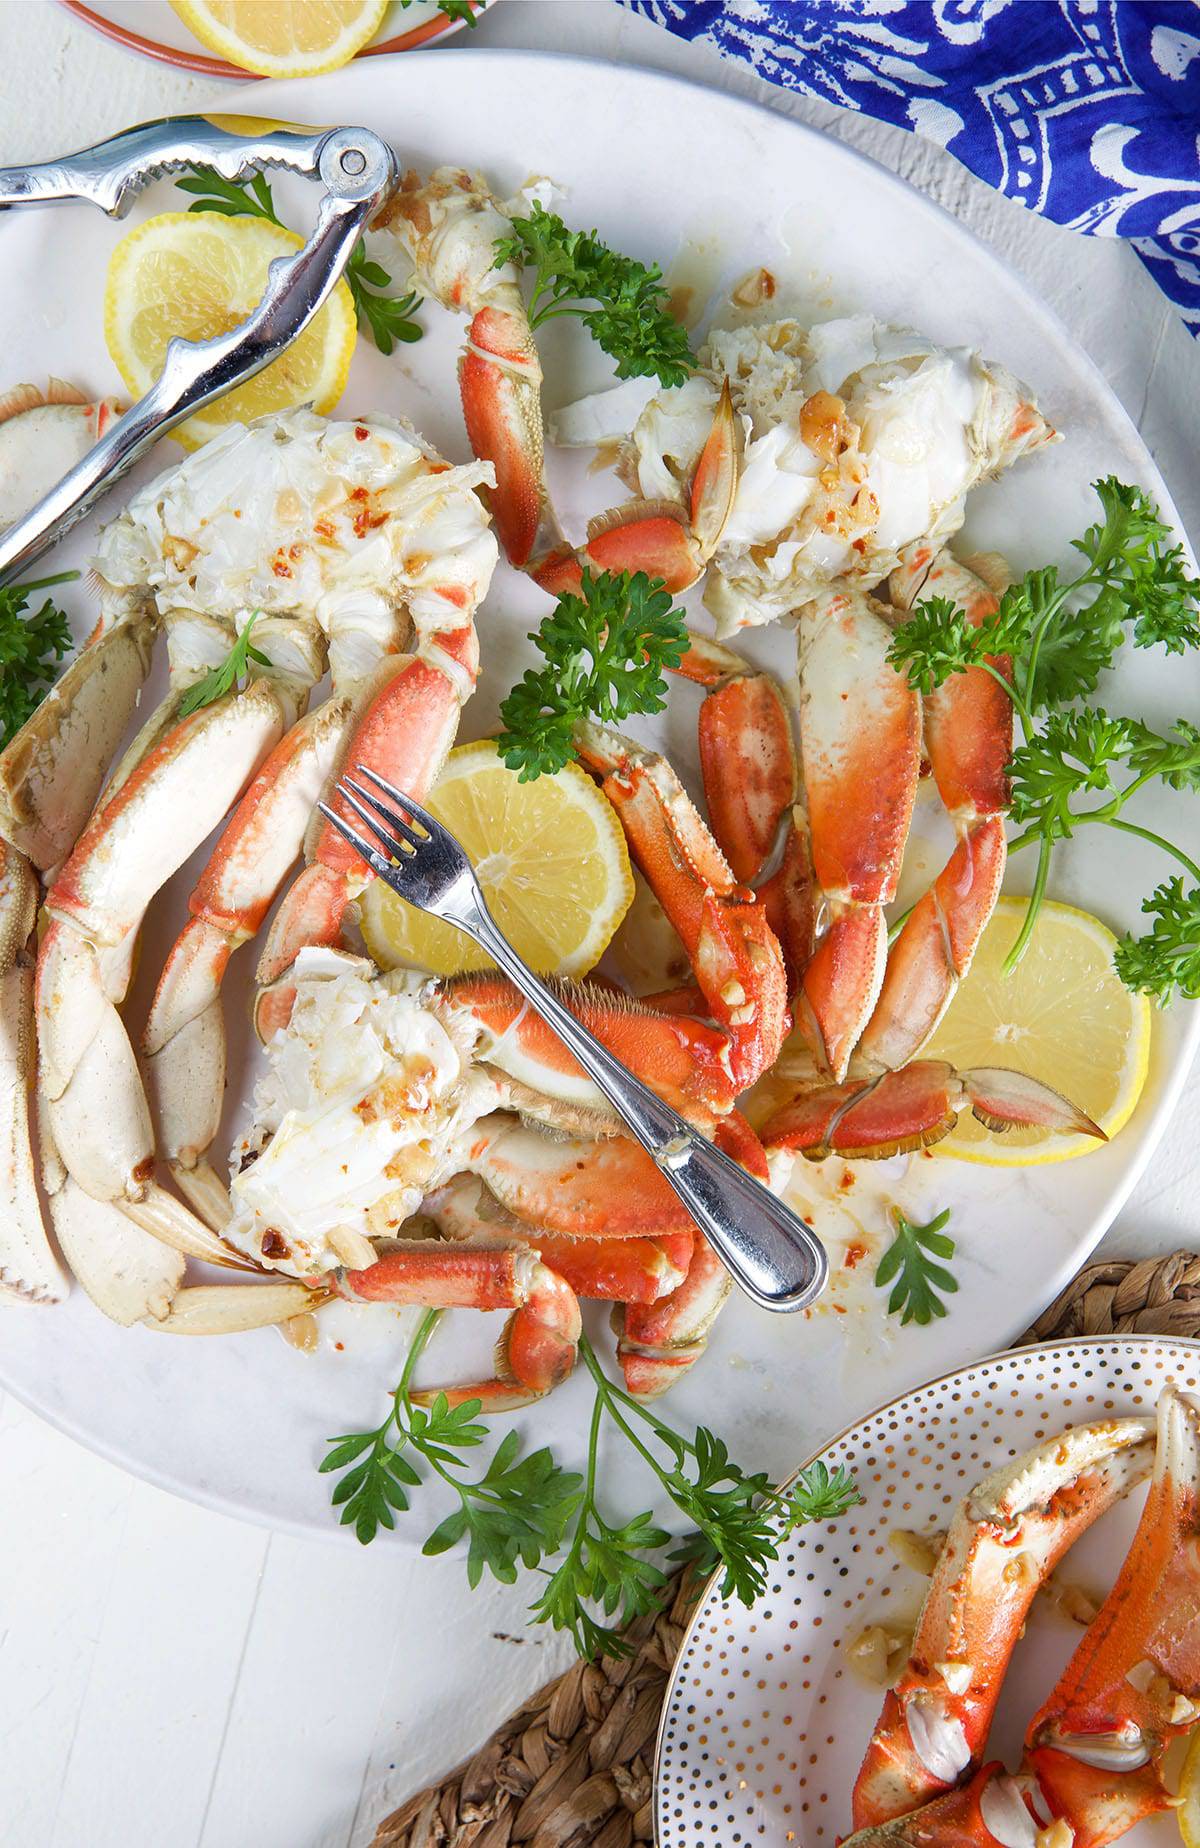 Several serving utensils are placed on a plate of crab legs.